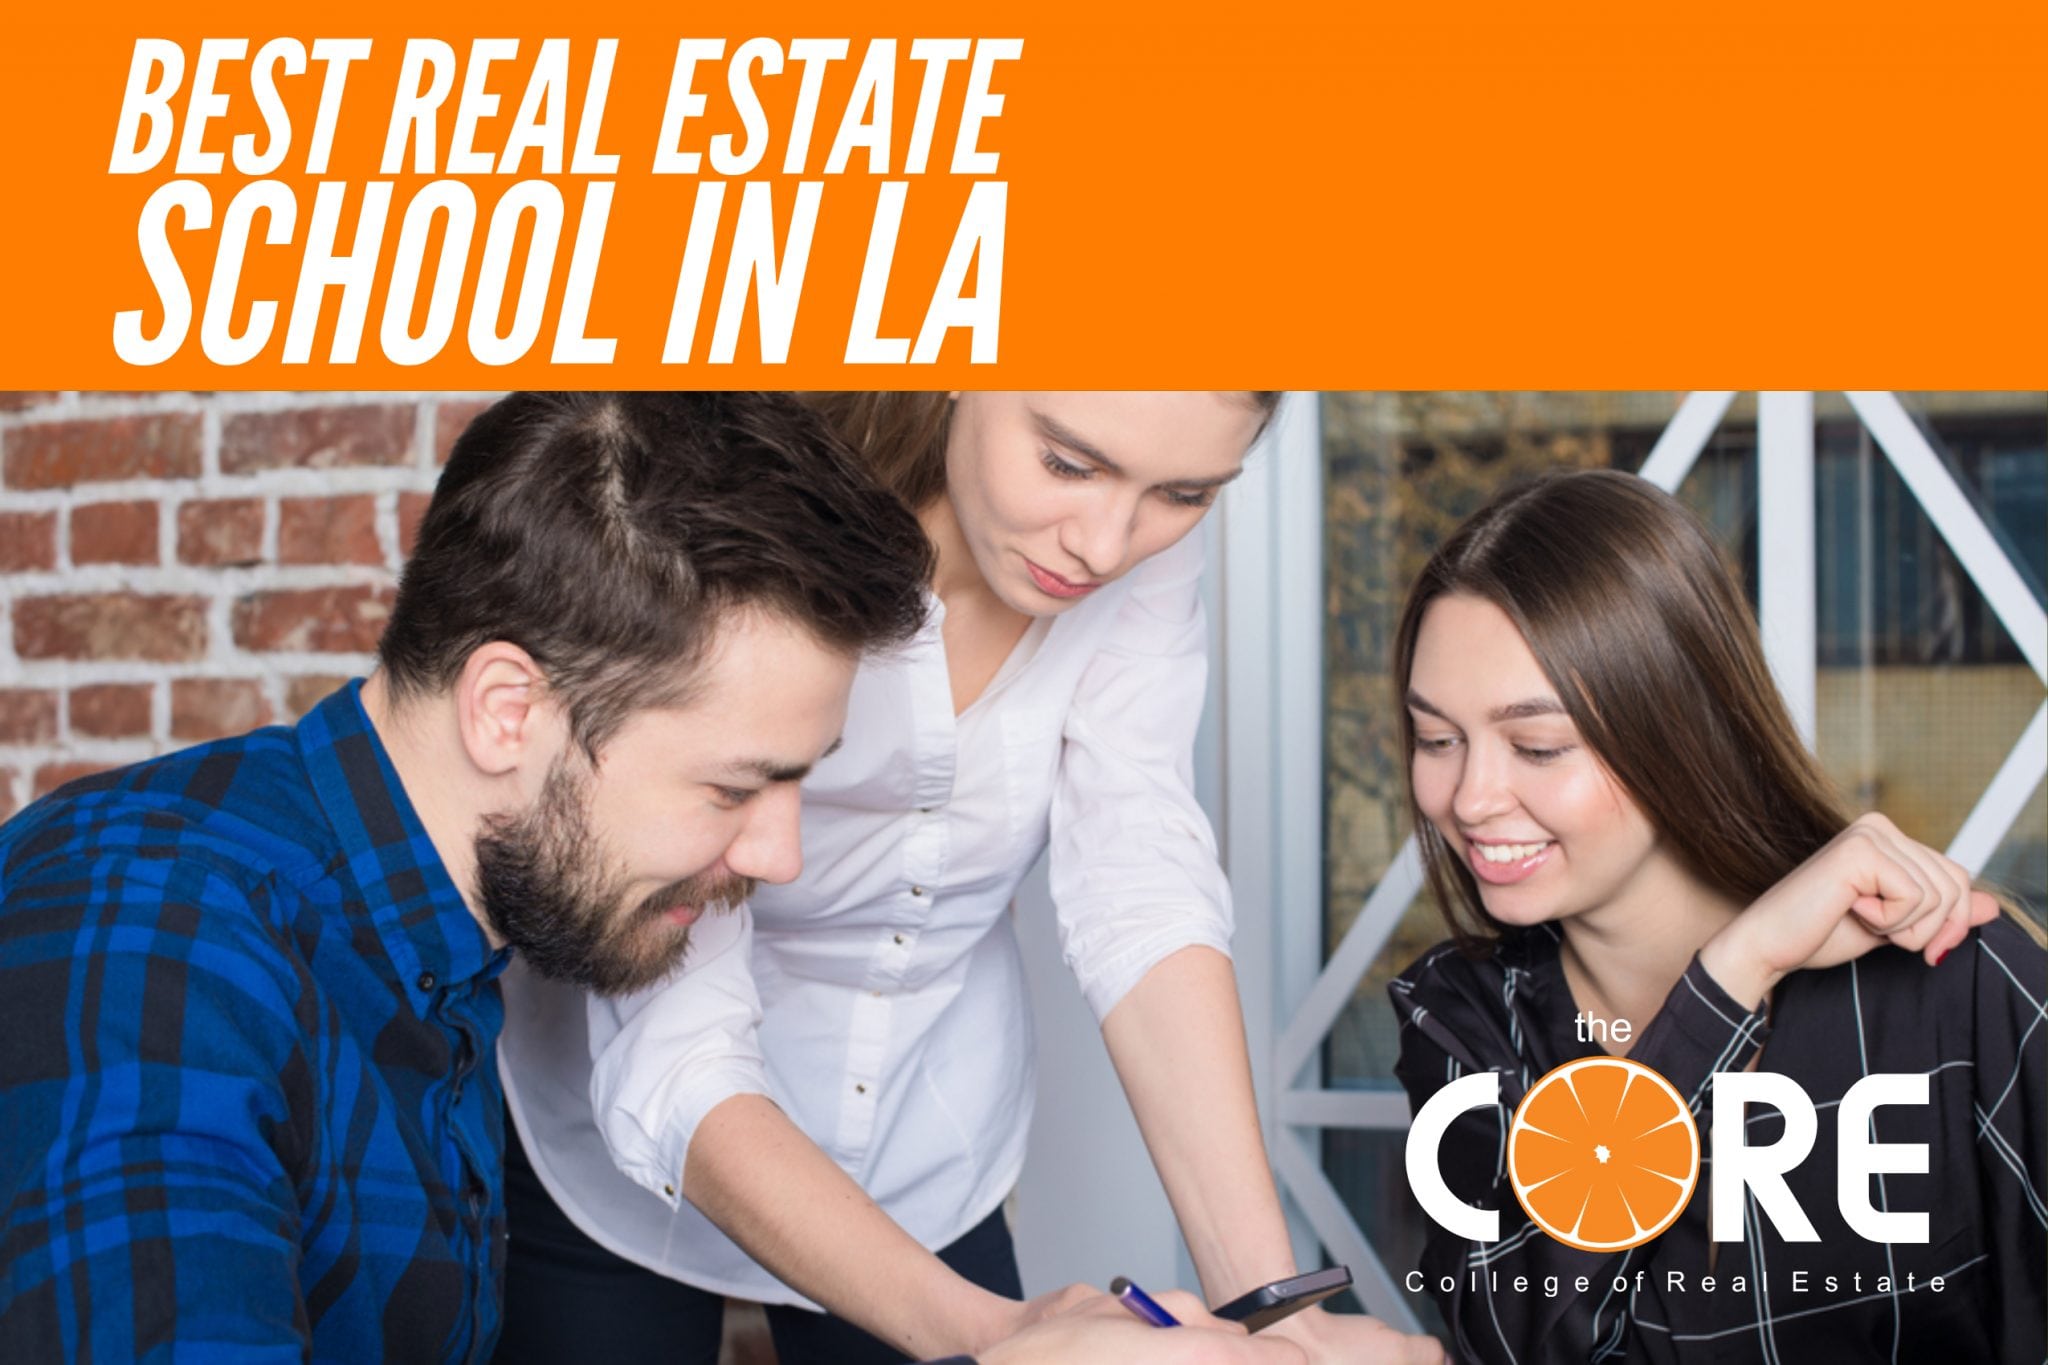 Get-Your-Real-Estate-License-Los-Angeles-Real-Estate-School-College-of-Real-Estate-theCORE-pasadena real estate agent pasadena real estate office pasadena real estate company best real estate company to work for los angeles which real estate company has the best training for new agents best pasadena realtor pasadena homes for sale pasadena real estate market